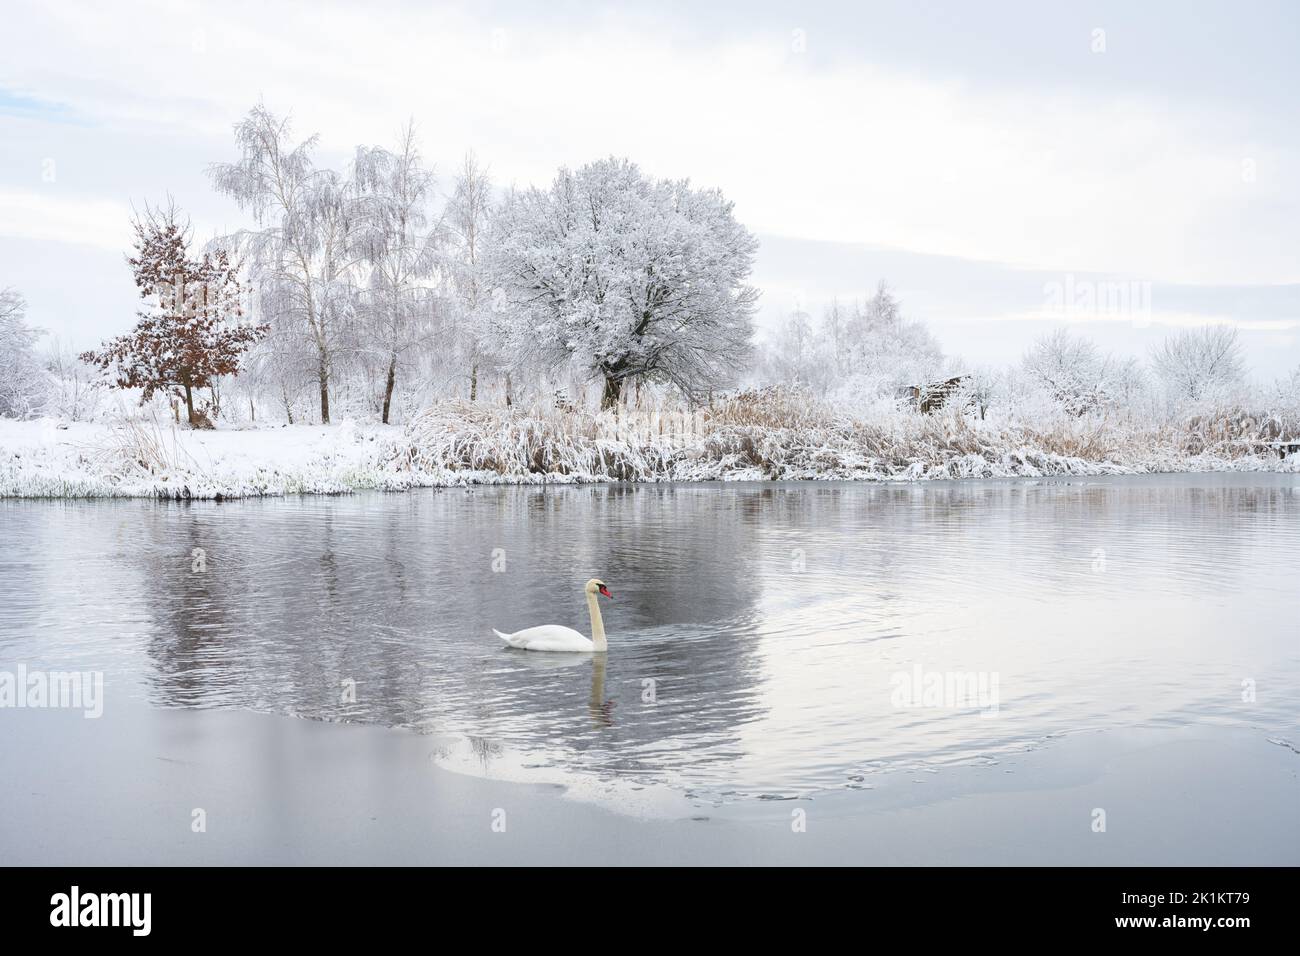 Alone white swan swim in the winter lake water in sunrise time. Frosty snowy trees on background. Animal photography Stock Photo